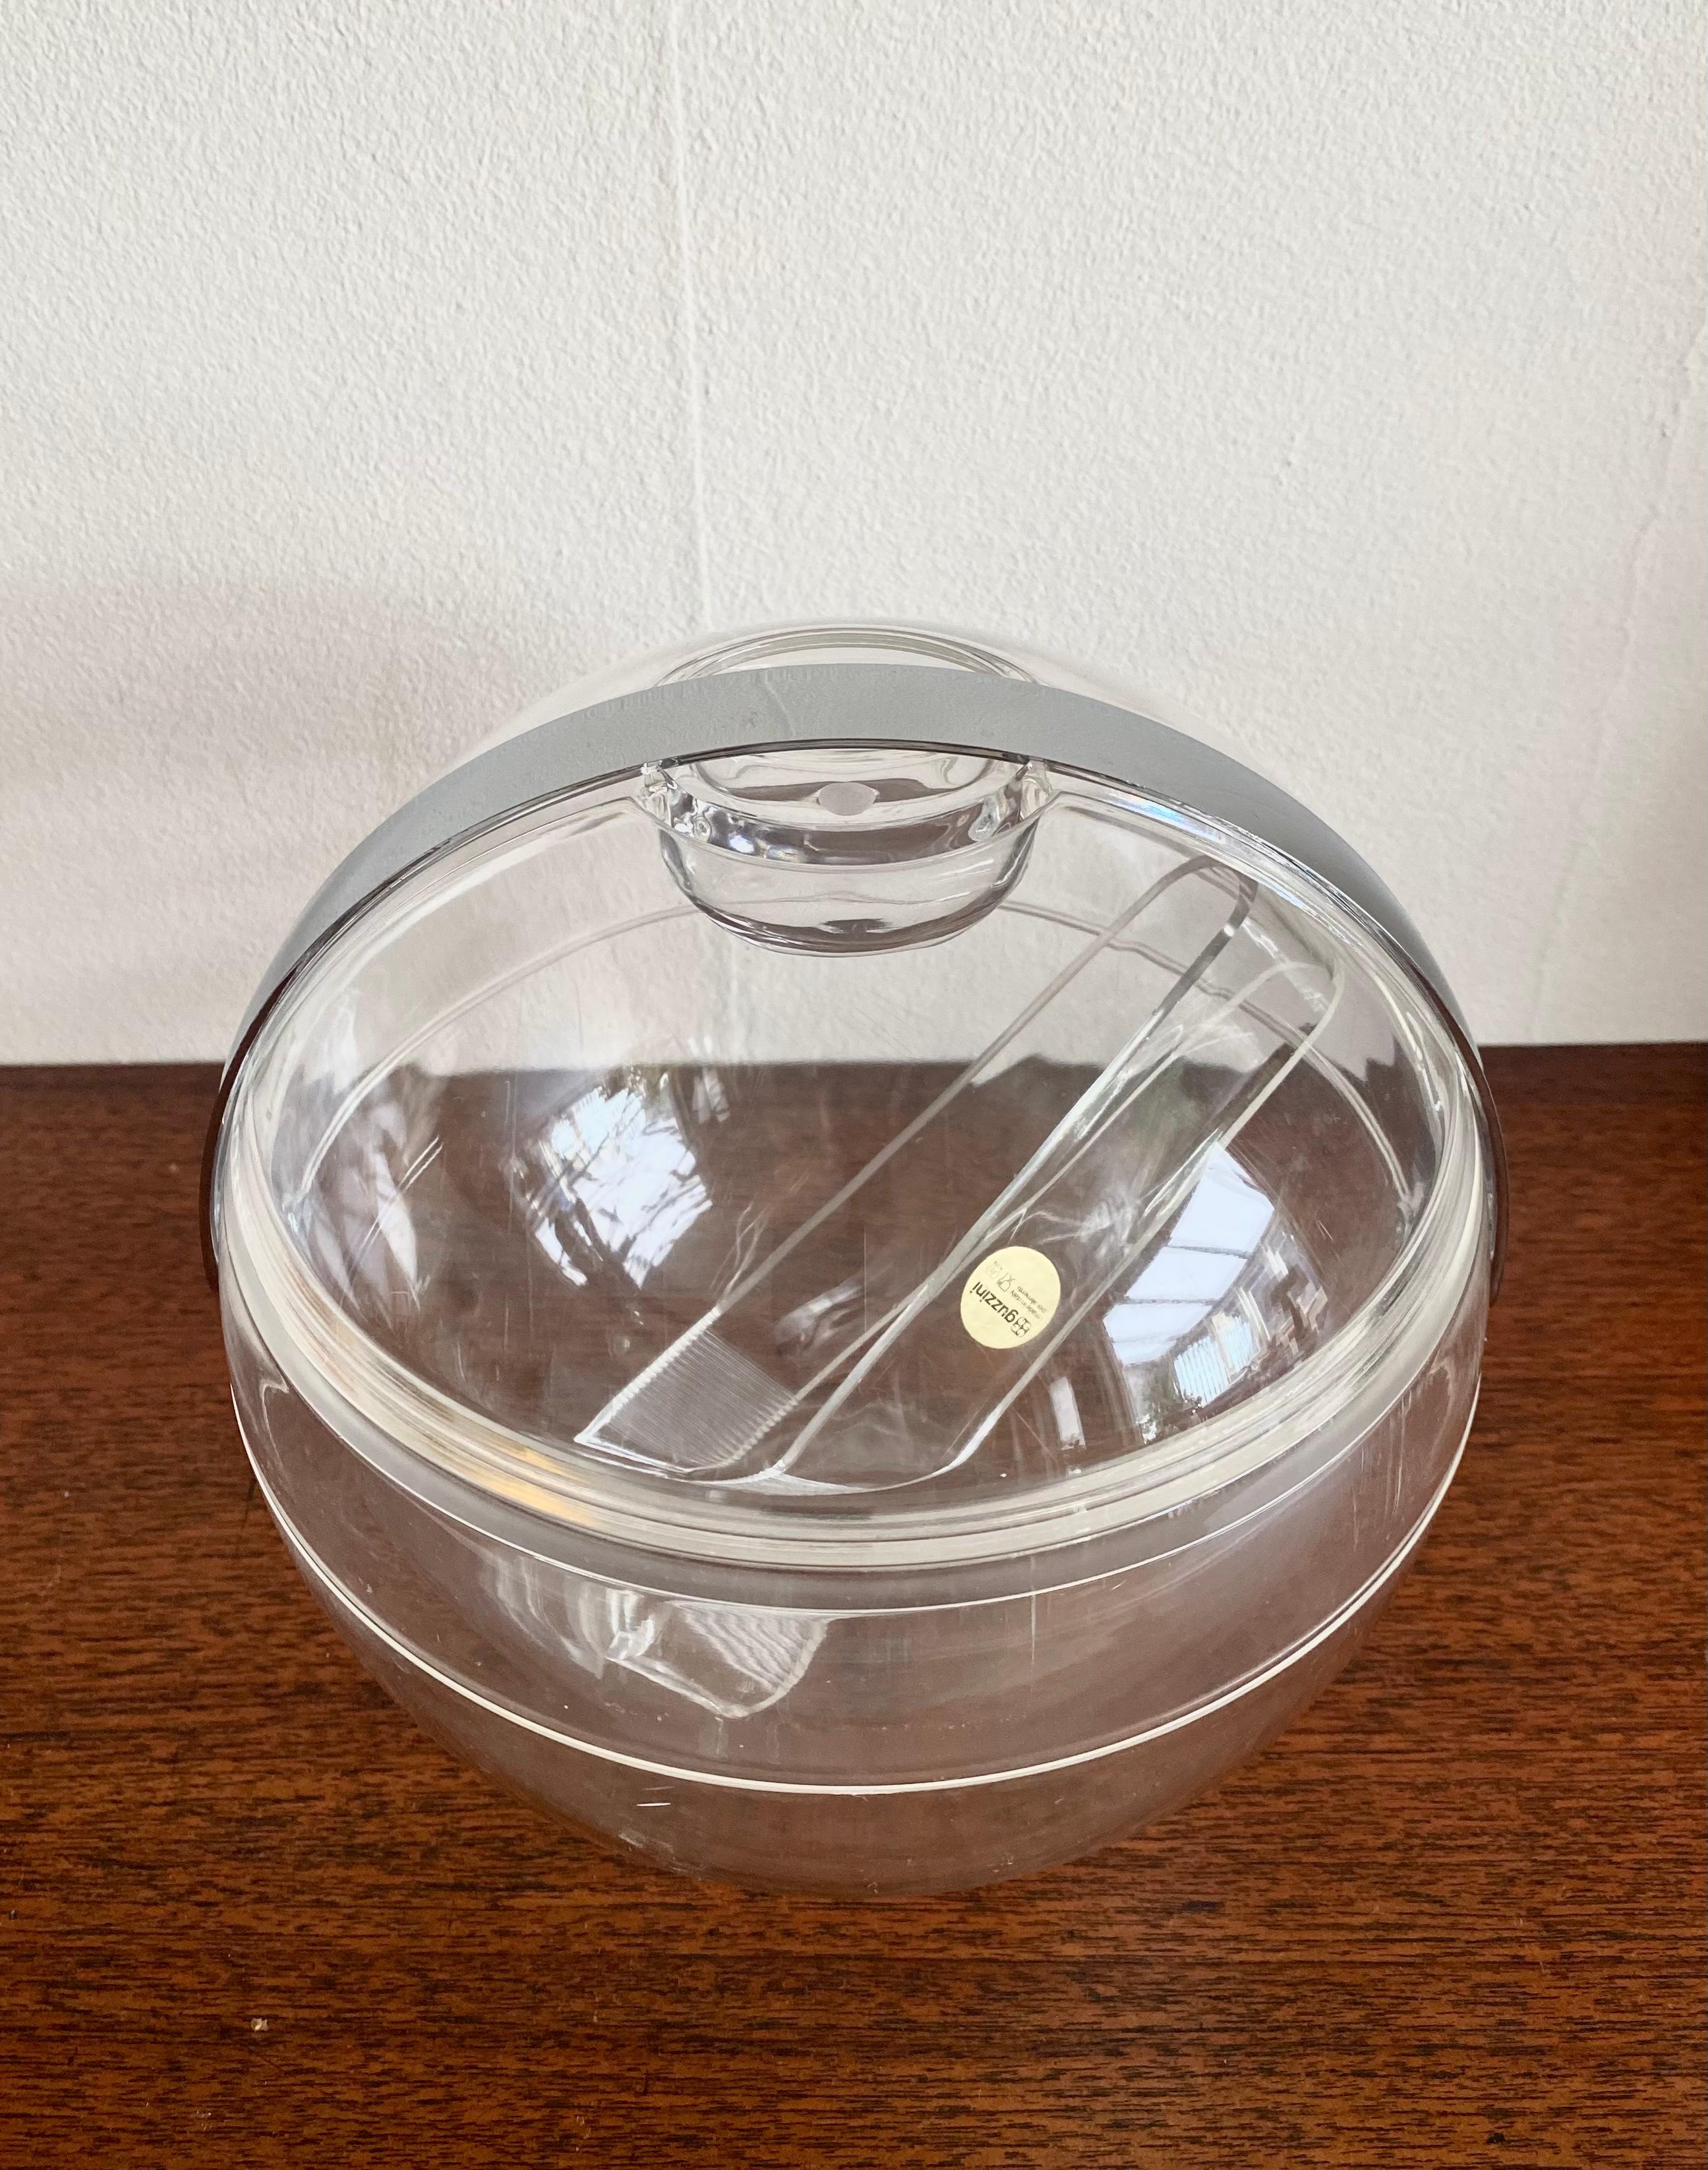 Clear Lucite icebucket, Model Stella, by Pablo Tilche for Guzzini Itali ca. 1970s. The piece remains in good vintage condition with some wear and corrosion of water (see:images). If you are interested in this item, feel free to make us a reasonable